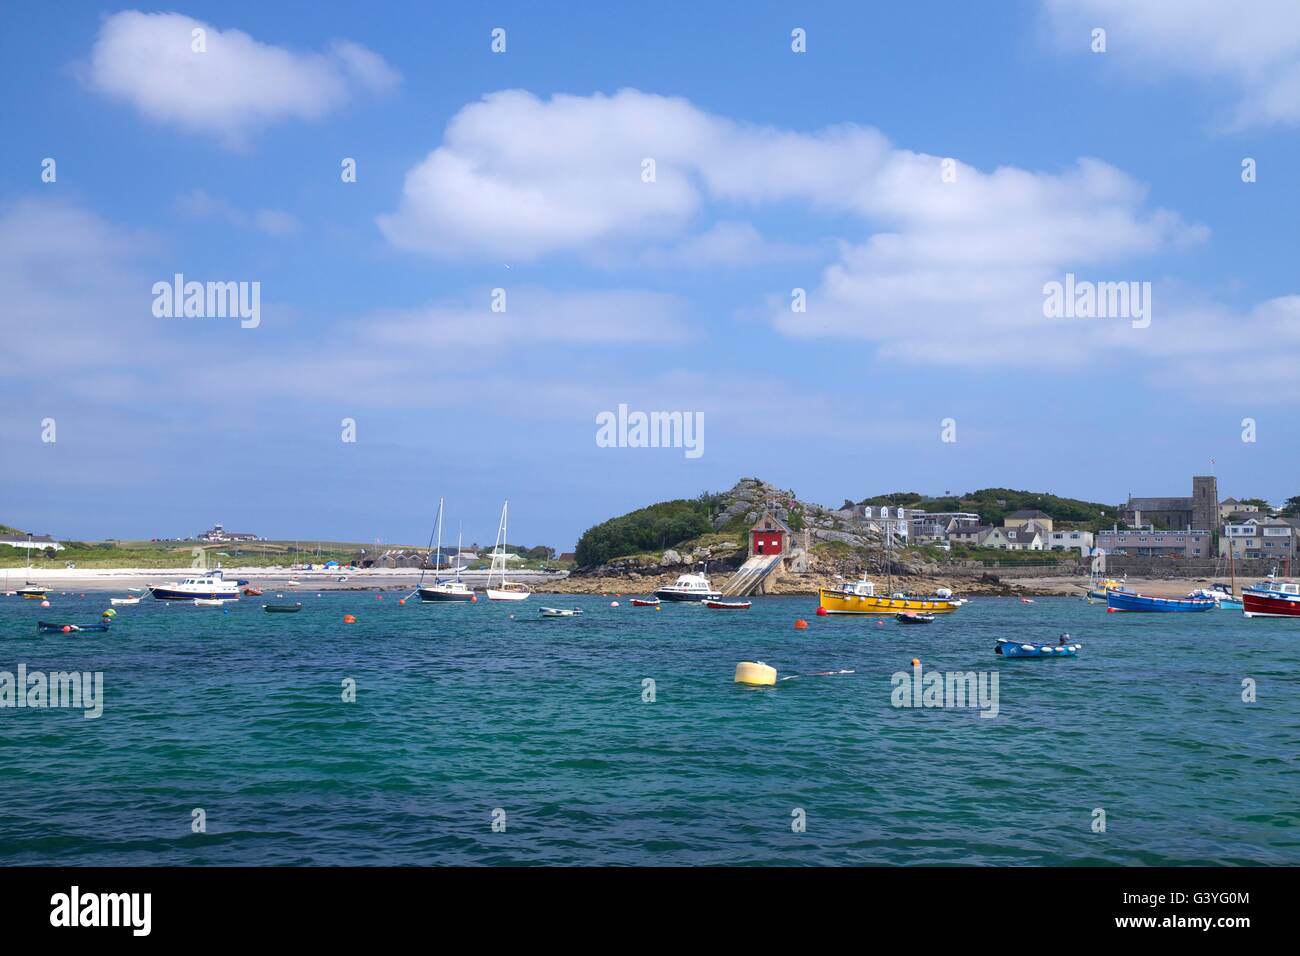 Lifeboat station and moored yachts off St Mary's, Isles of Scilly, Cornwall, England, UK, GB Stock Photo